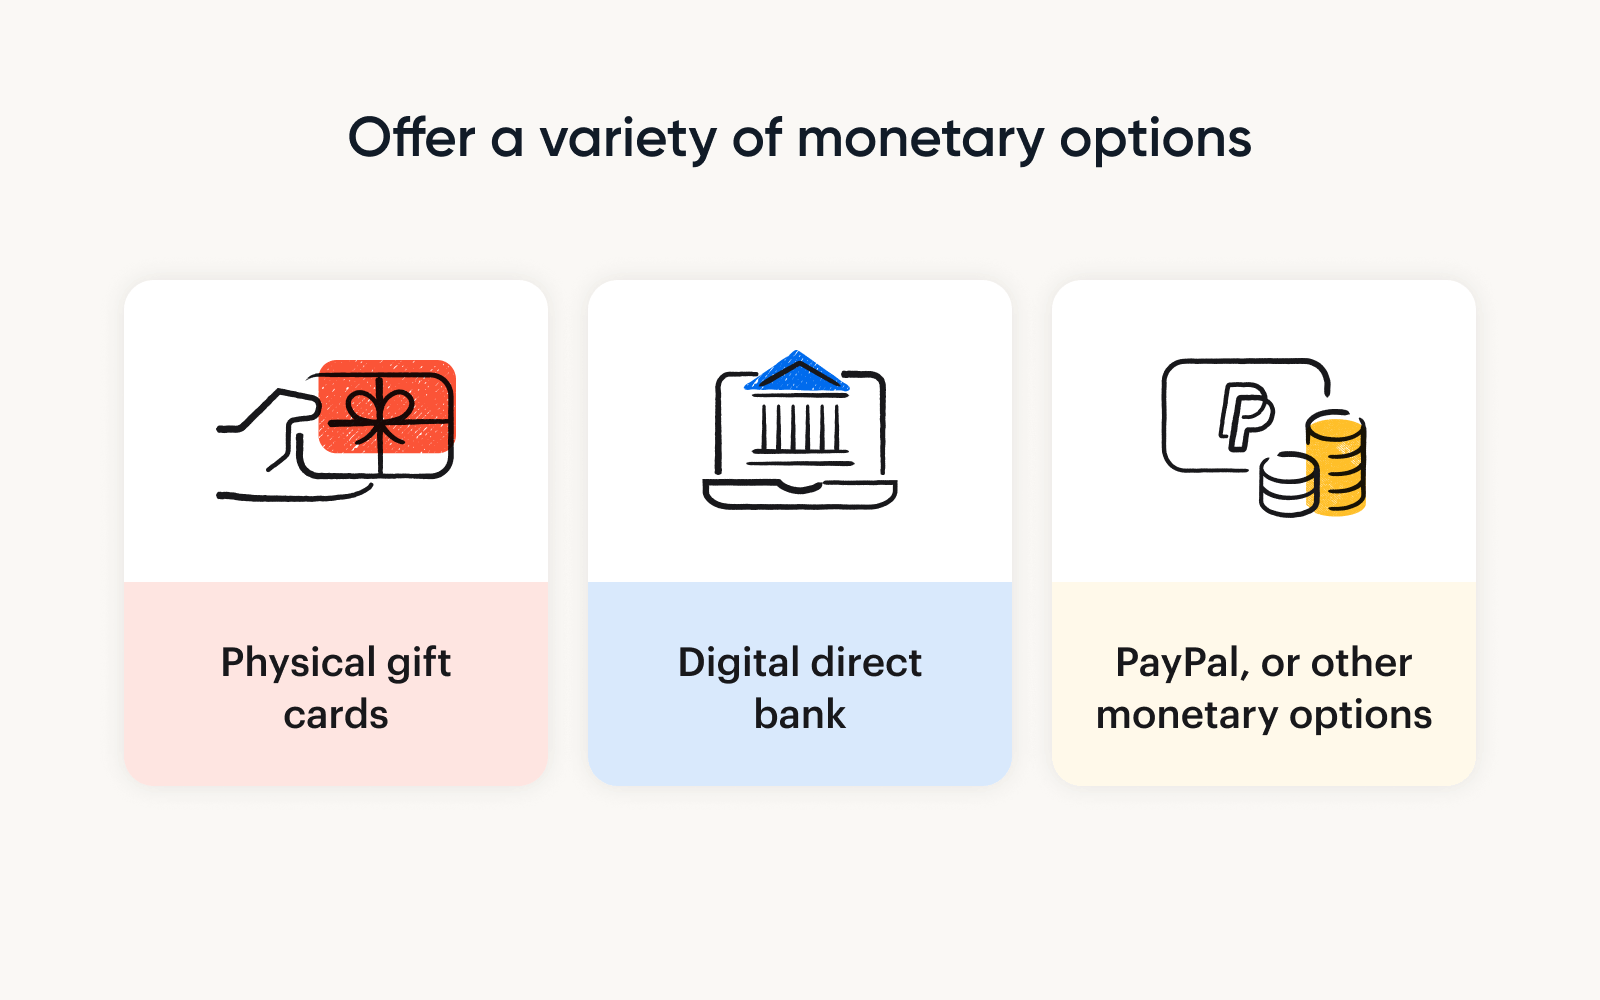 A graphic showing that nonprofits can offer community members physical gift cards, digital bank transfers, or PayPal gift cards rather than physical items.